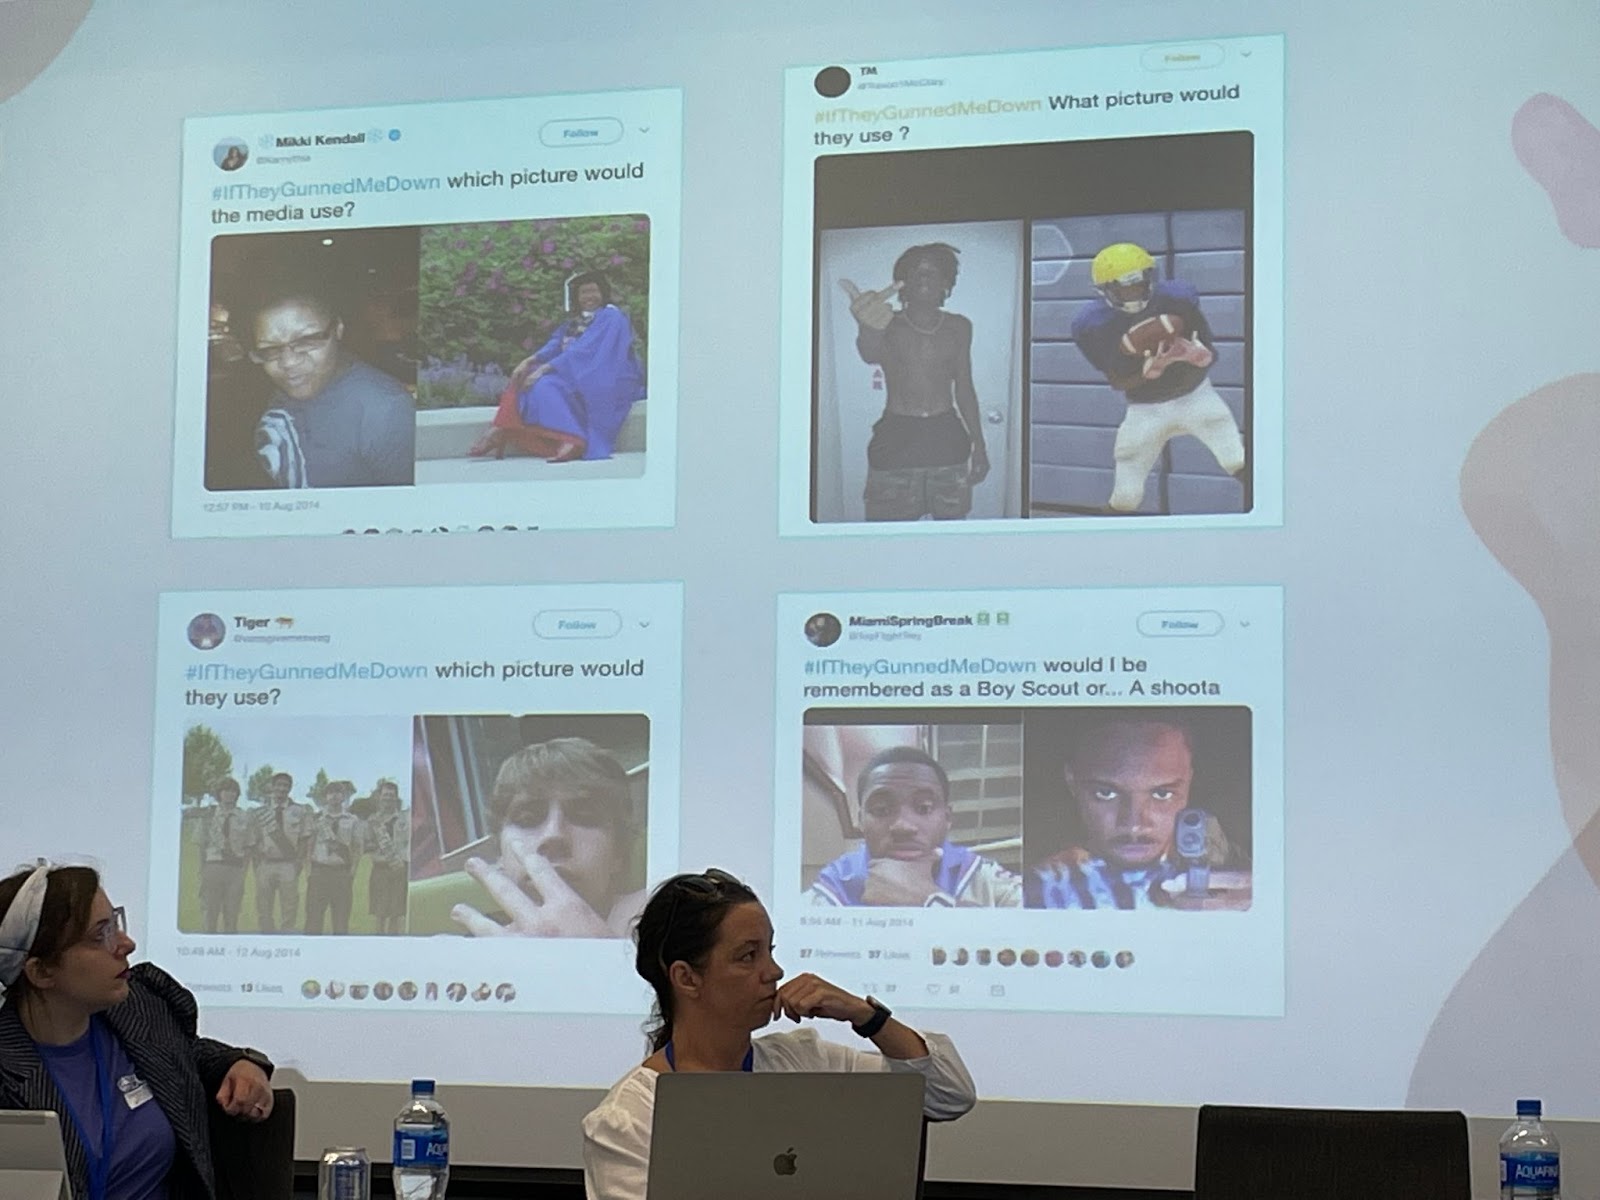 Shelton’s slide shows four #iftheygunnedmedown tweets which use juxtaposition to highlight the dissonance between dominant narratives and counterstories of identity and representation. 